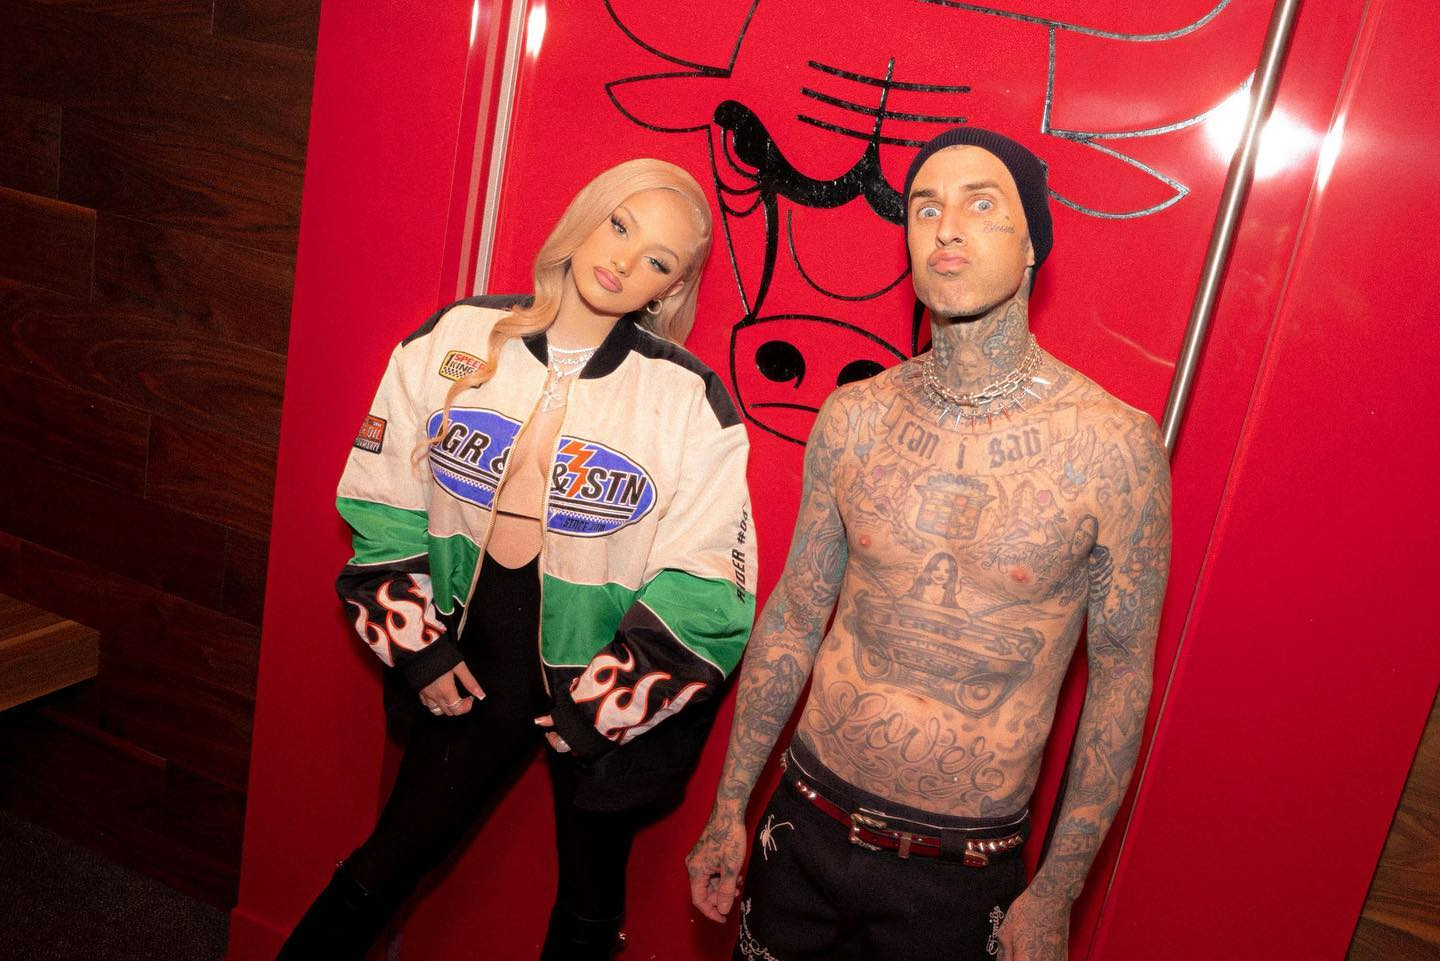 Alabama posed with her father Travis Barker